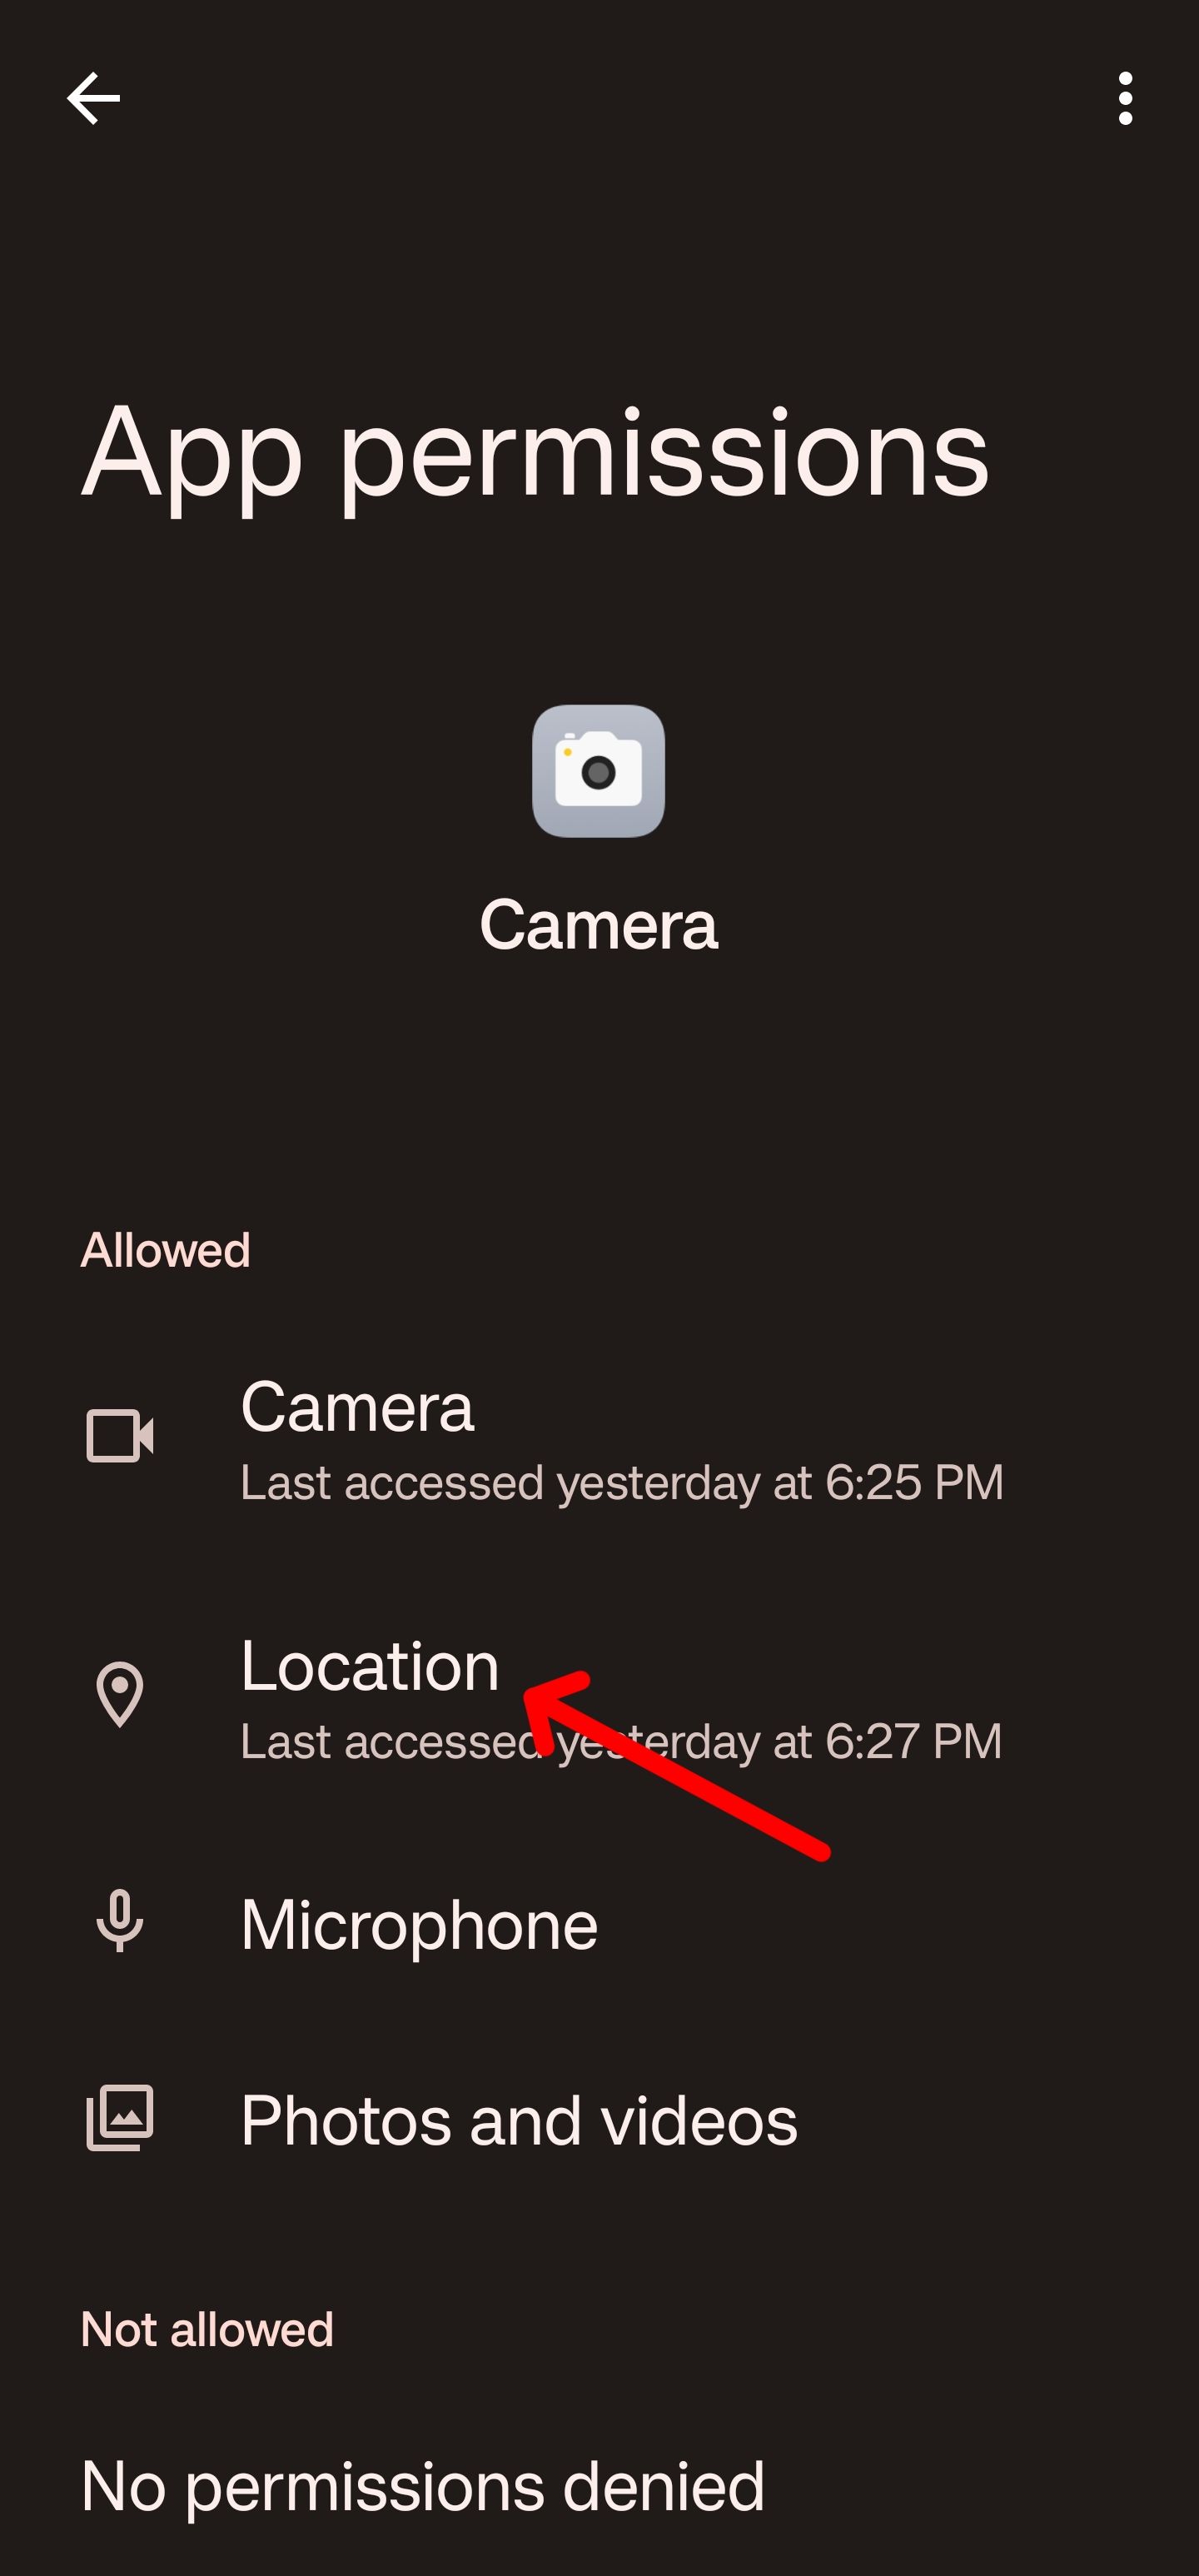 Tap location to access location permissions.